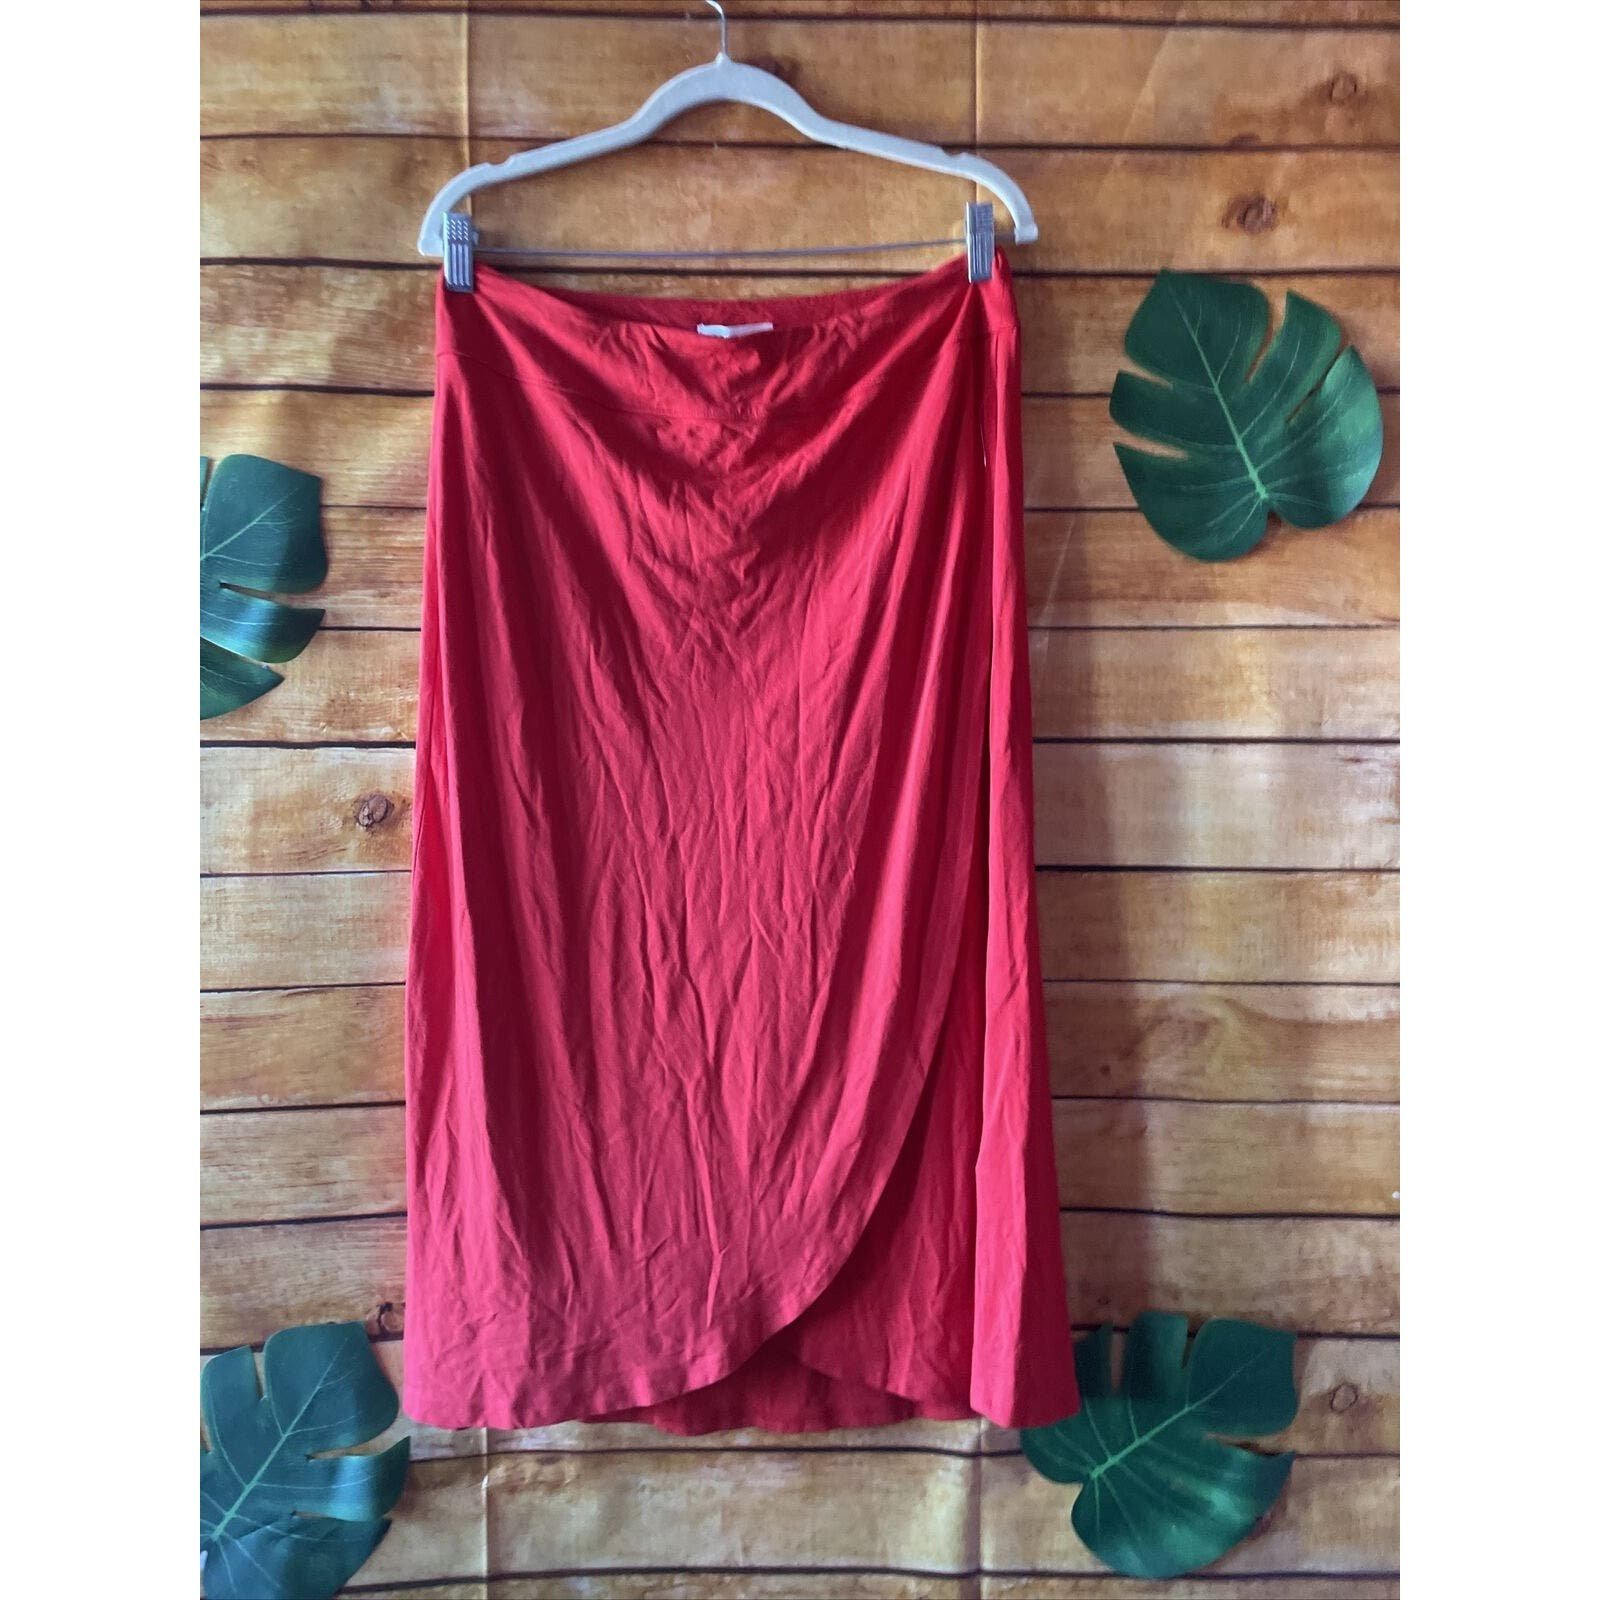 Personality Artisan Ny Midi Red Skirt Size L NWT HL5kW3